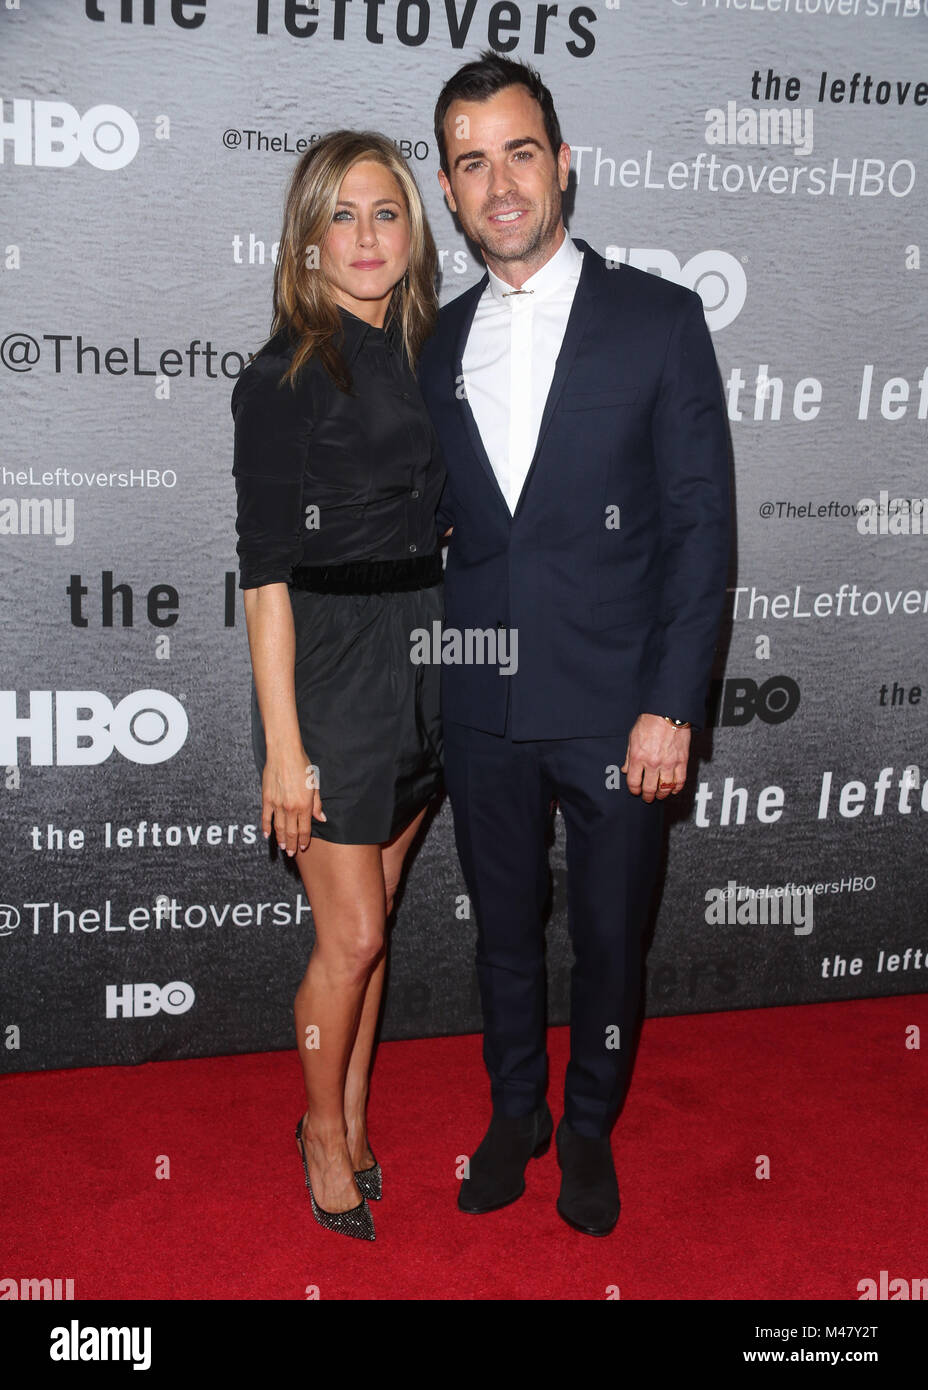 Justin Theroux and Jennifer Aniston attend 'The Leftovers' premiere at NYU Skirball Center on June 23, 2014 in New York City. Stock Photo